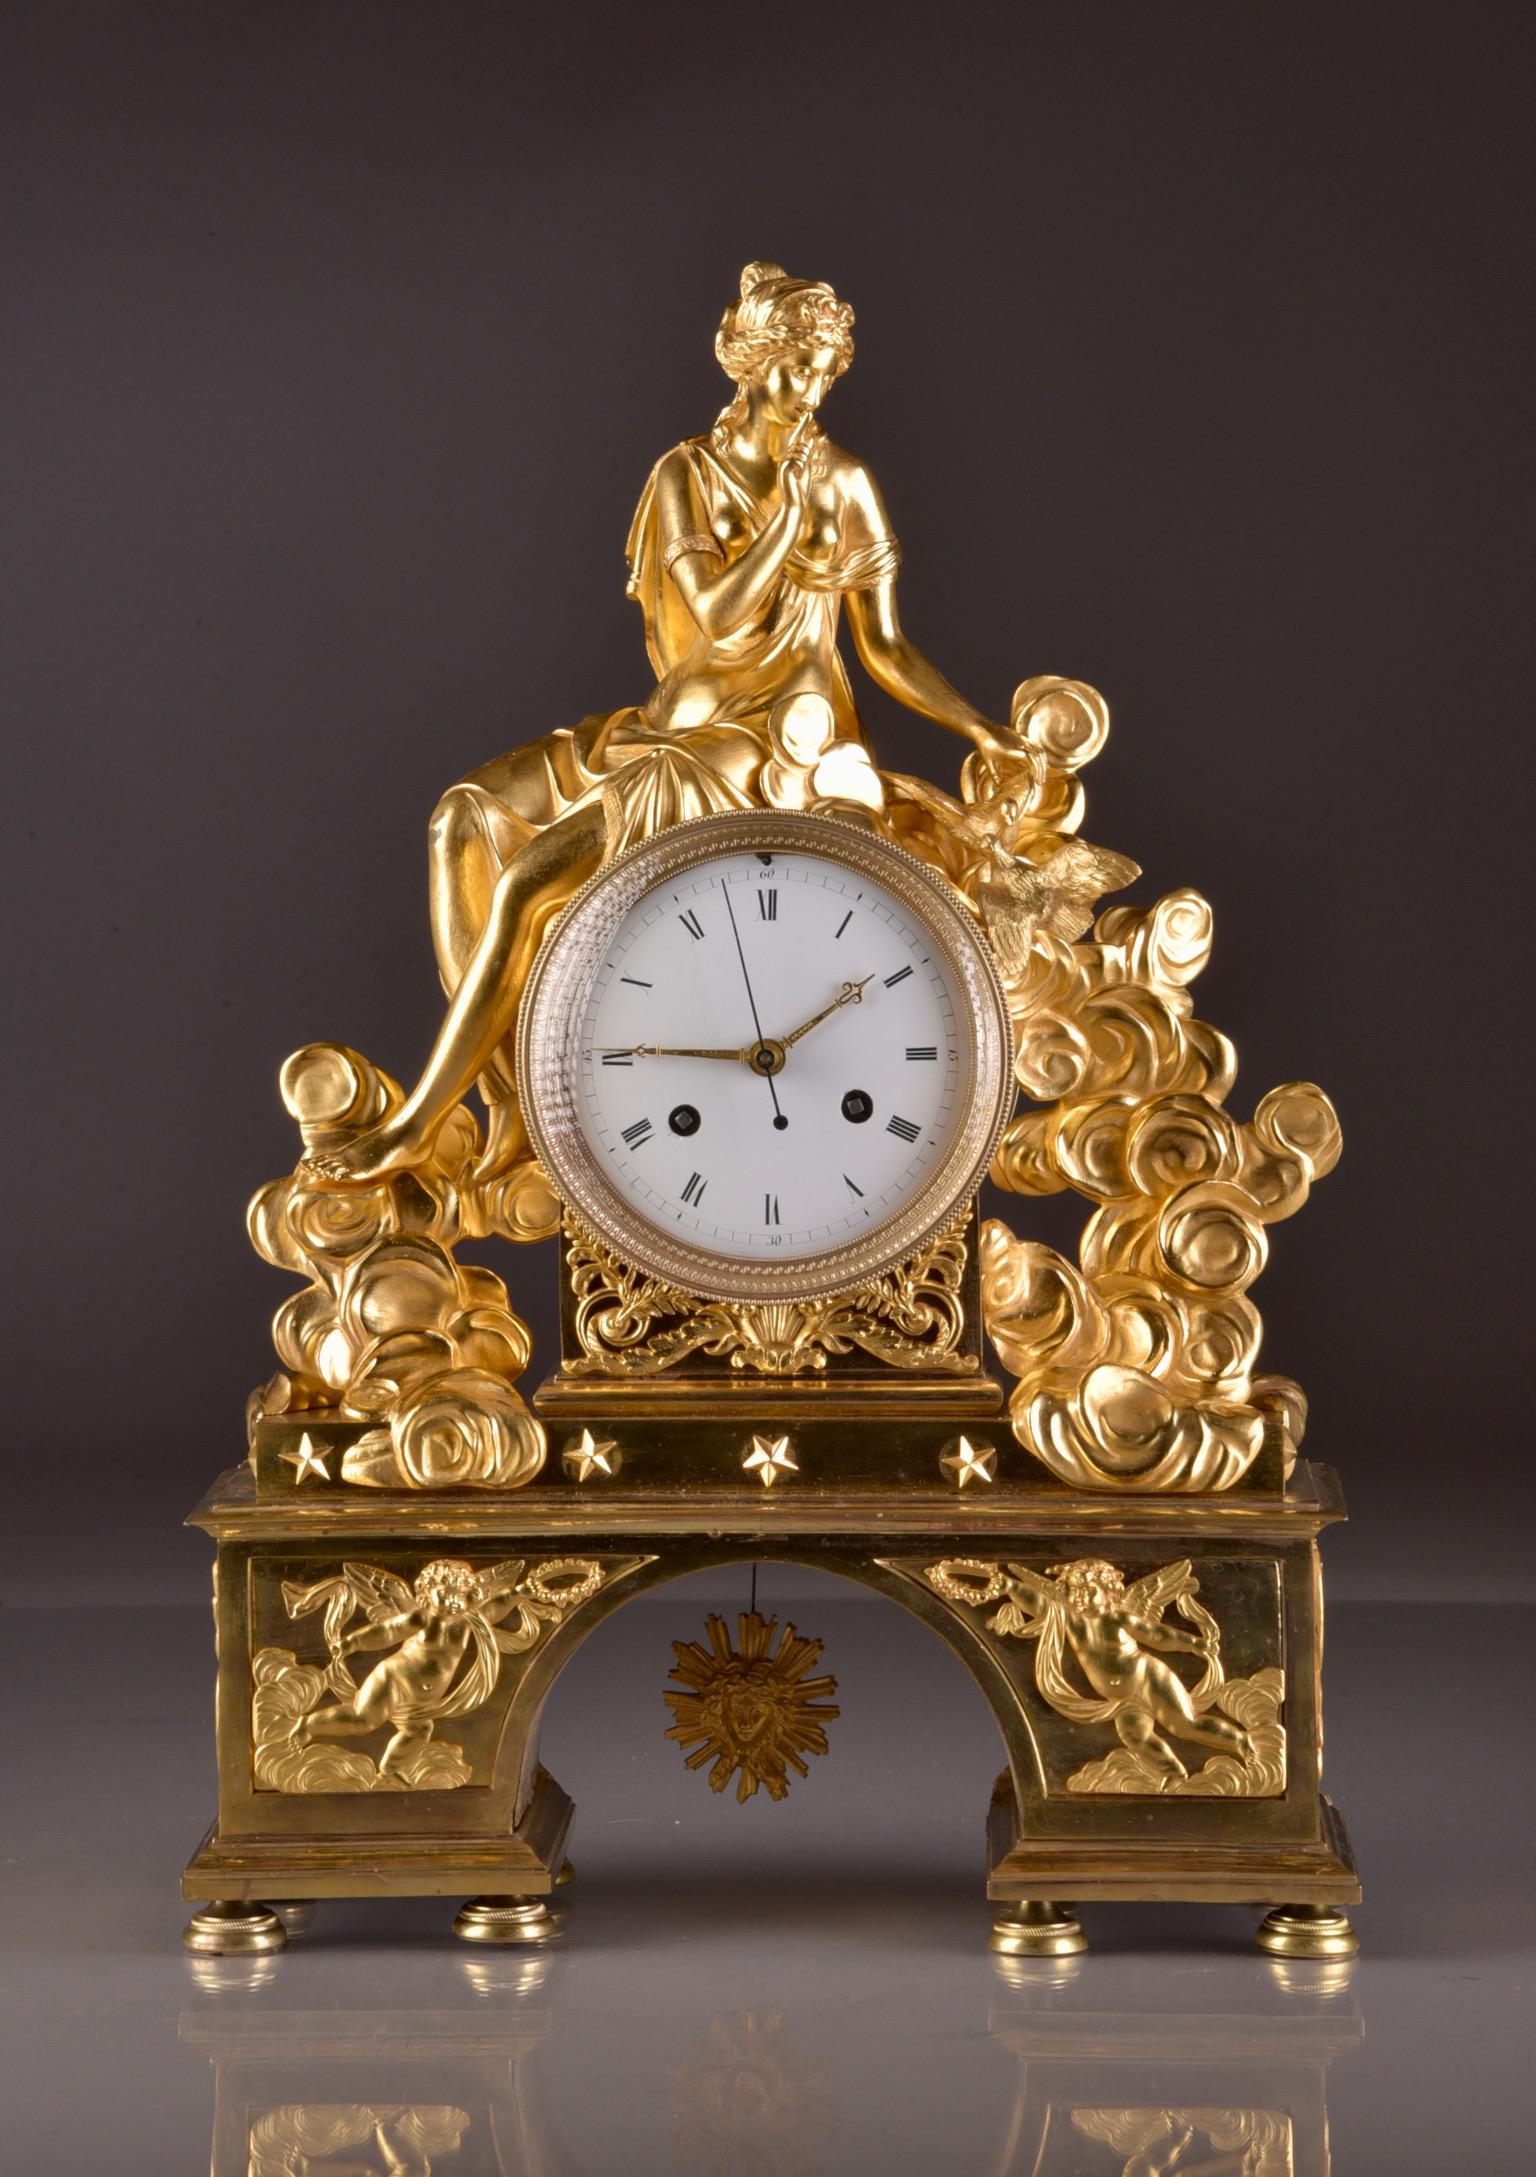 Rare Large Romantic French Directoire Mantel Clock, Late 18th C In Good Condition For Sale In Ulestraten, Limburg